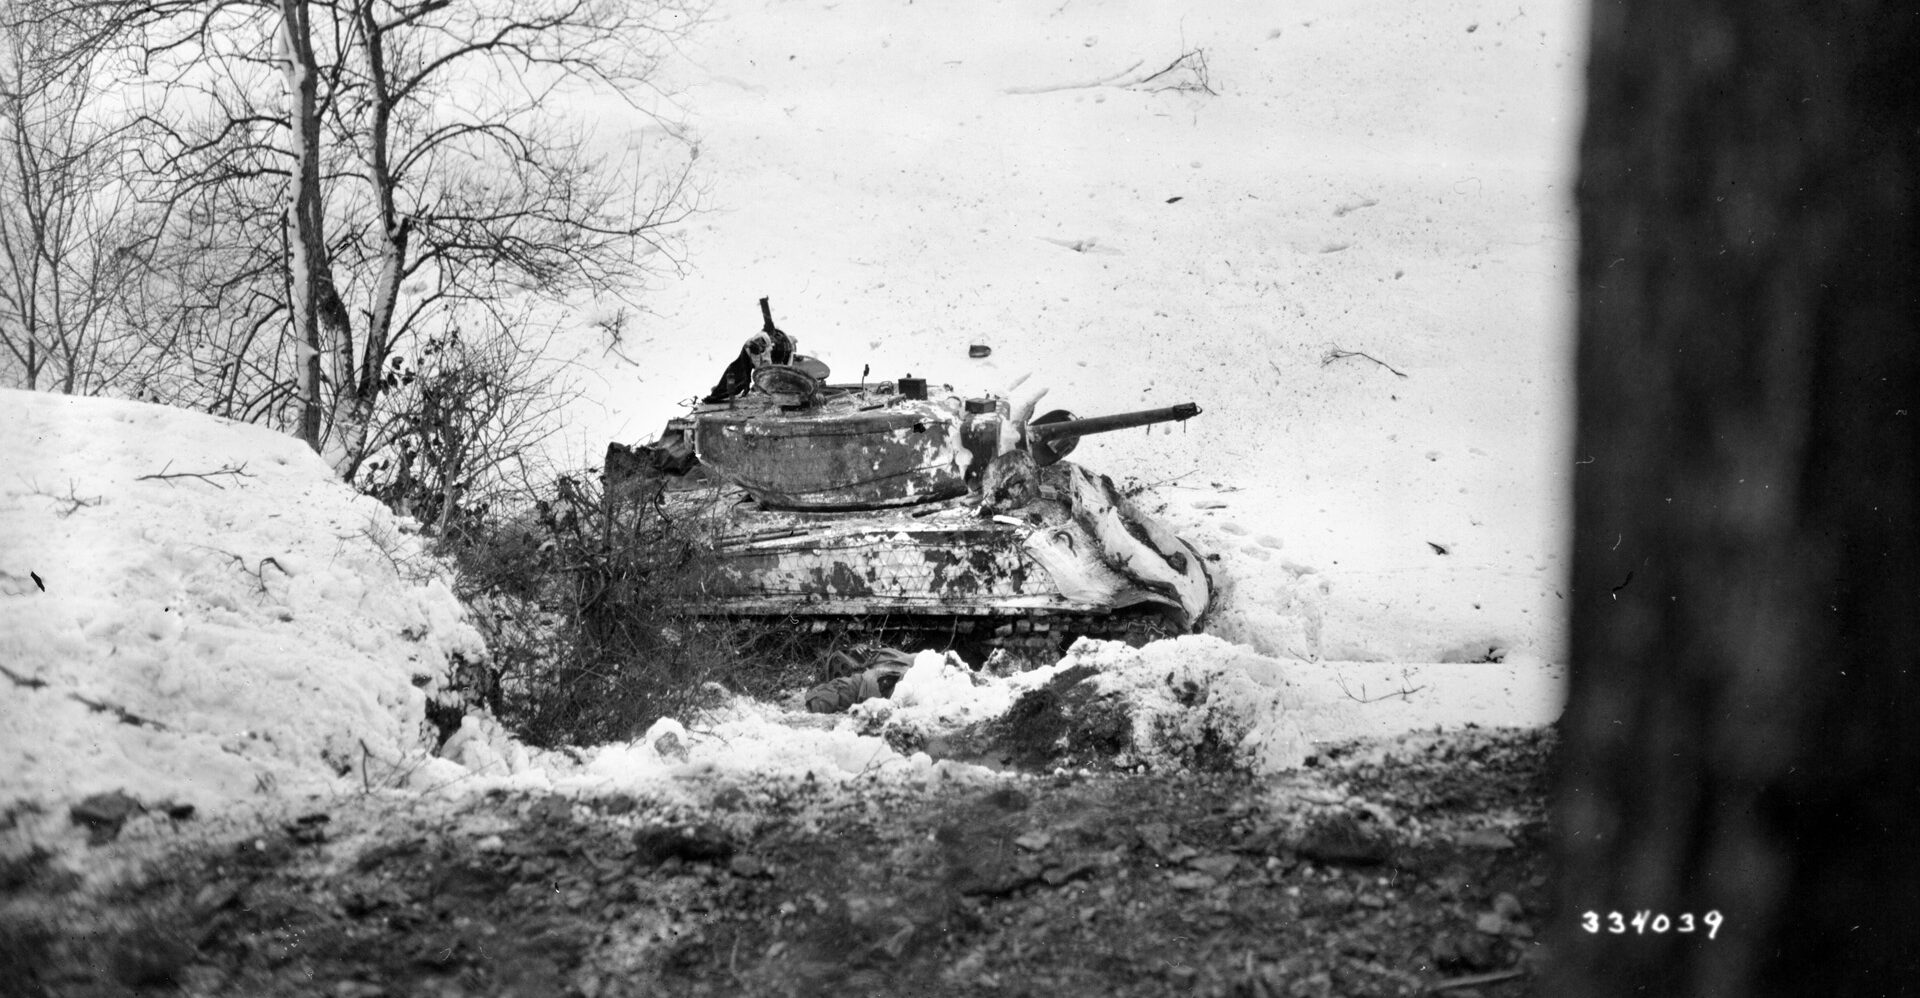  An M4 Sherman tank of the 737th Tank Battalion has hit an icy patch and skidded off a road in Luxembourg while supporting the 5th Infantry Division’s movement toward German positions.